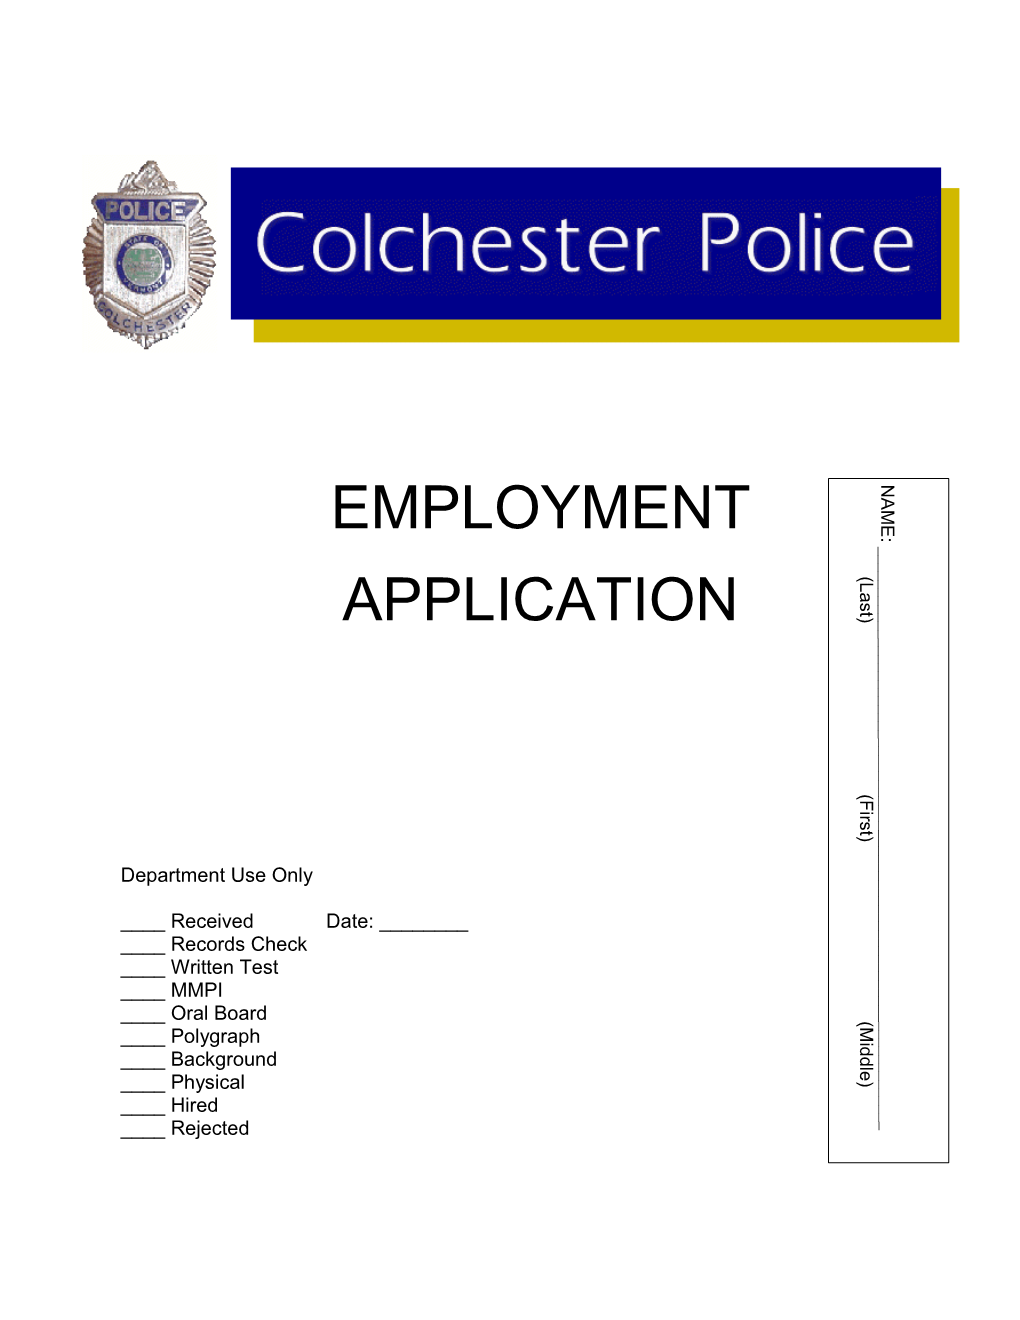 Colchester Police Department